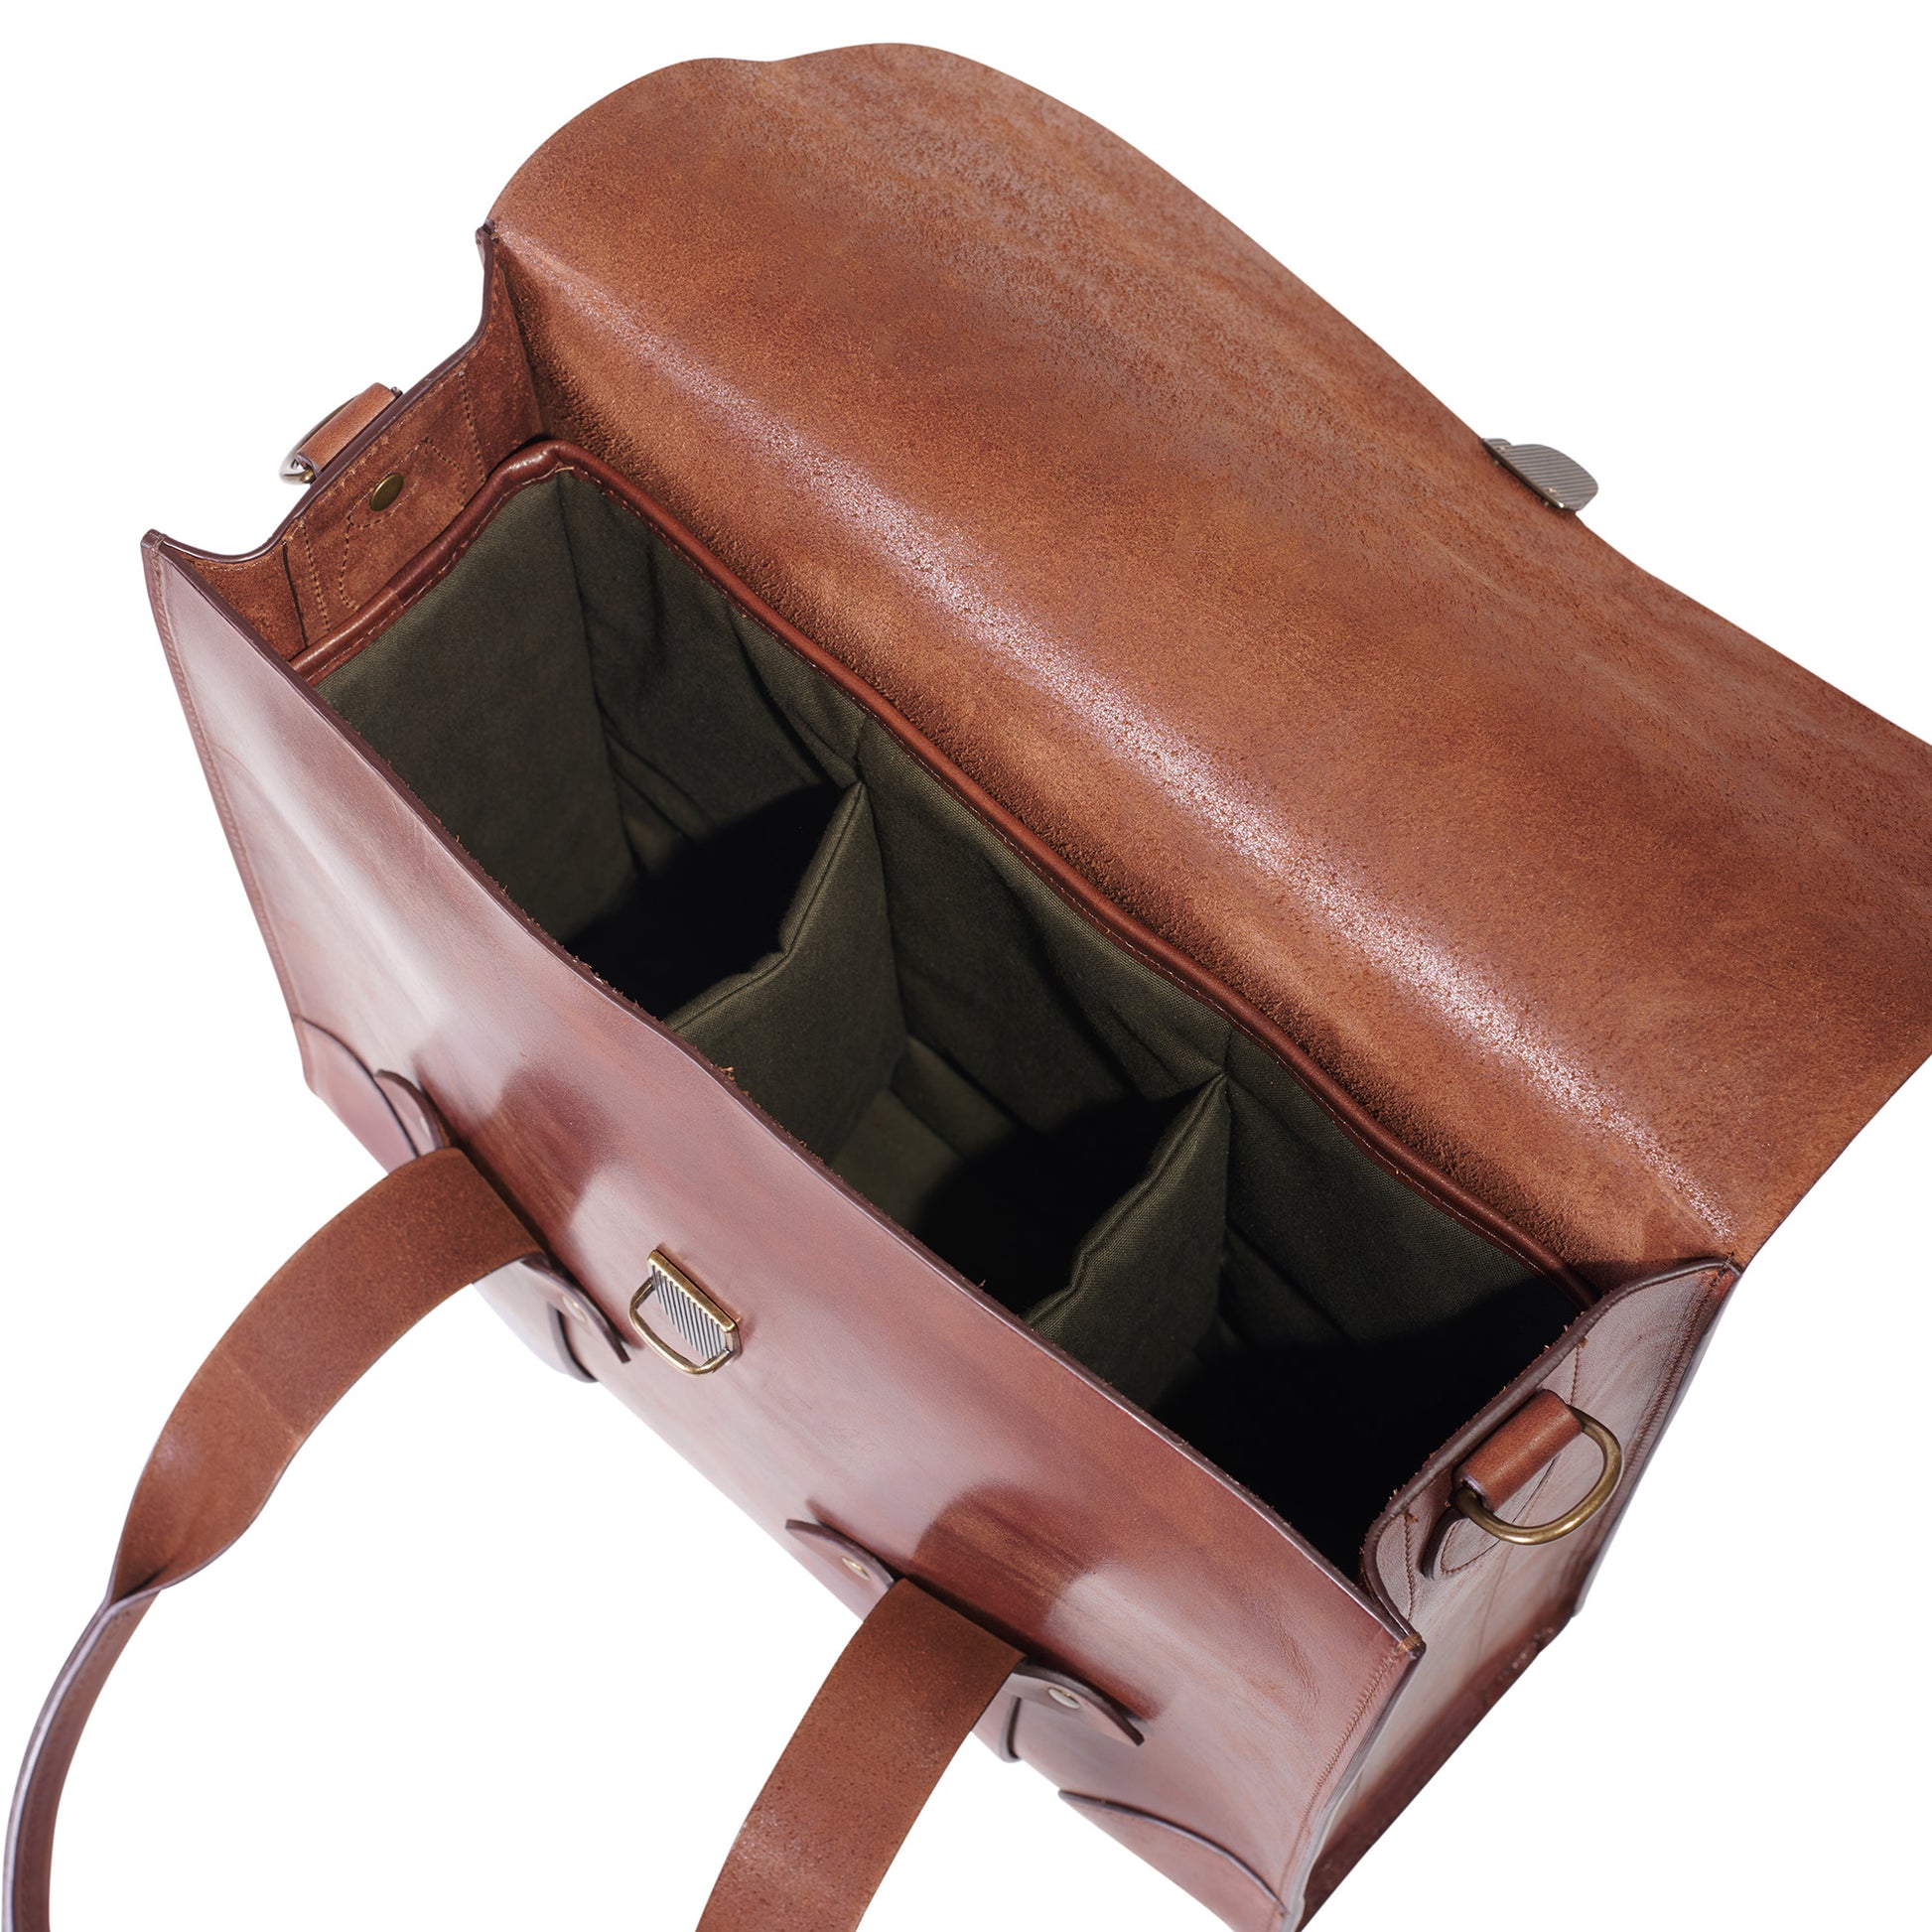 inside view of leather bourbon bag with padded water repellent canvas bottle holders by Jackson Wayne 